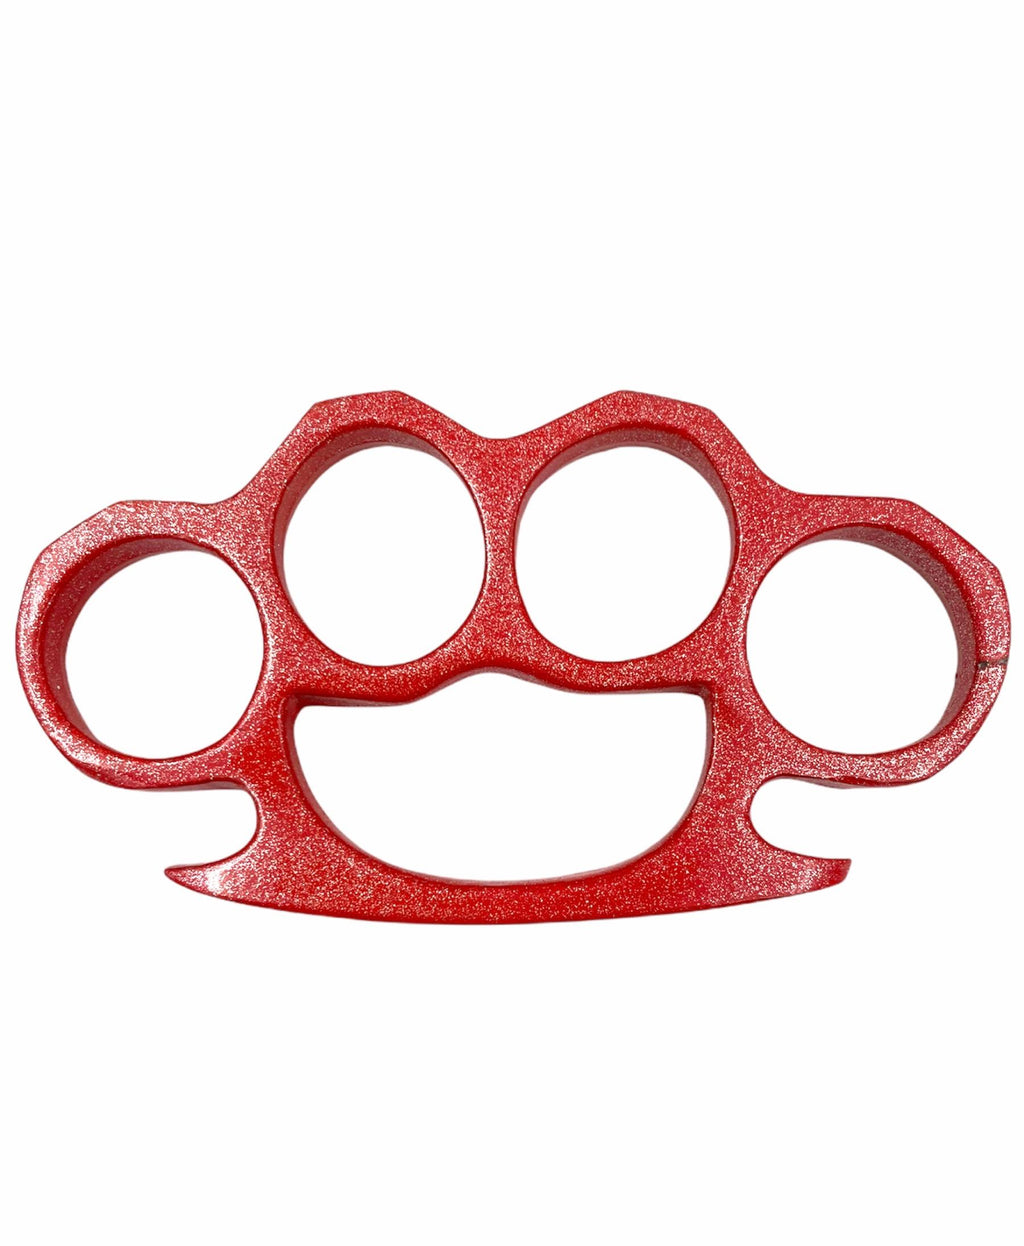 Solid Steel Knuckle Duster Brass Knuckle - RED